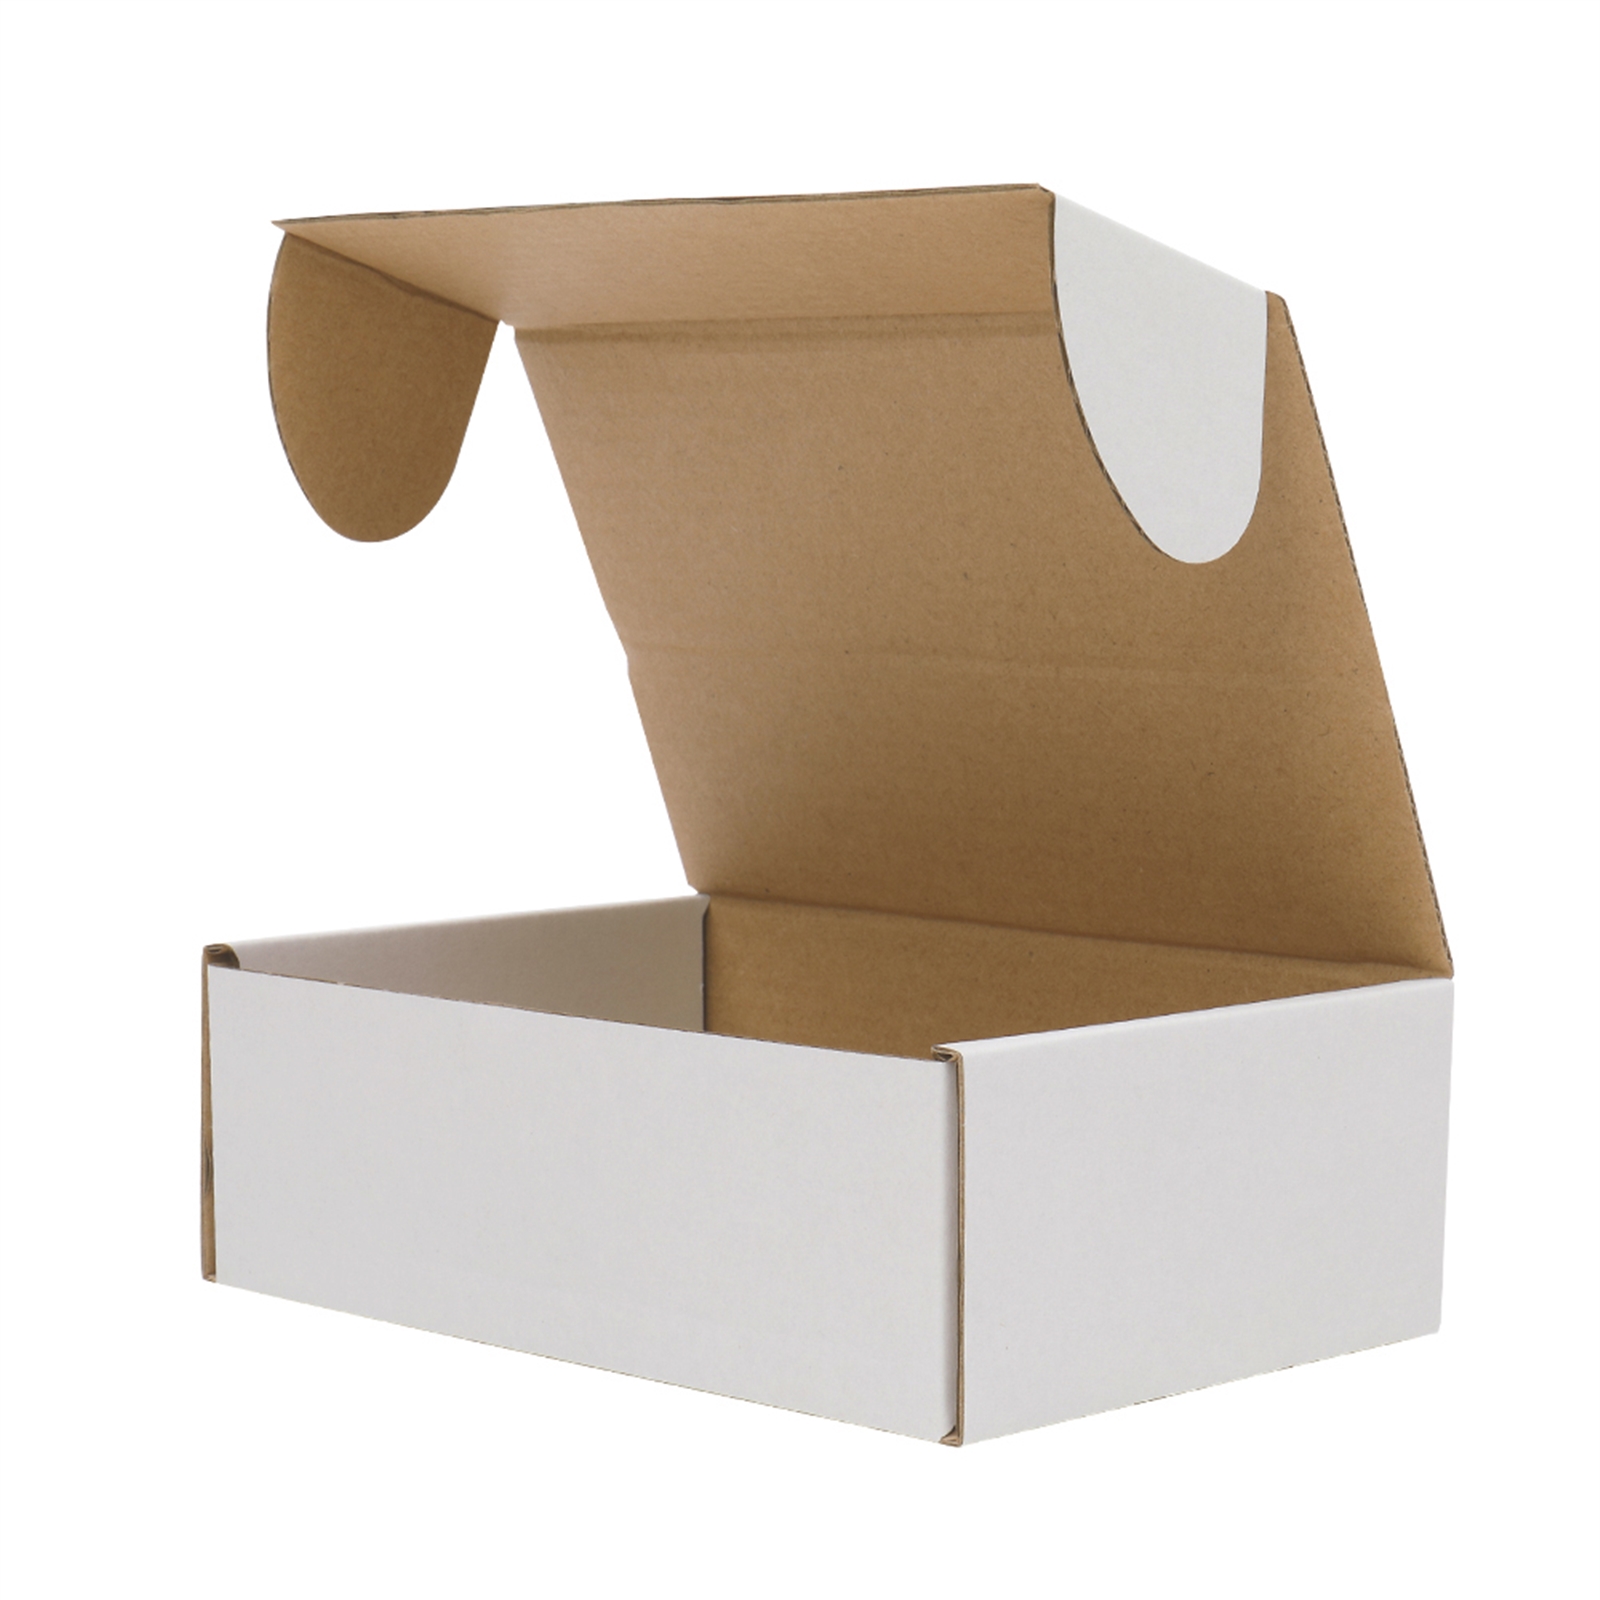 

WACO 50Pcs Home Kraft, Gift Wrap Packaging Box Blank Carton Paper-Box with Lid Cardboard Boxes, 6x4x2" (Stock in US)